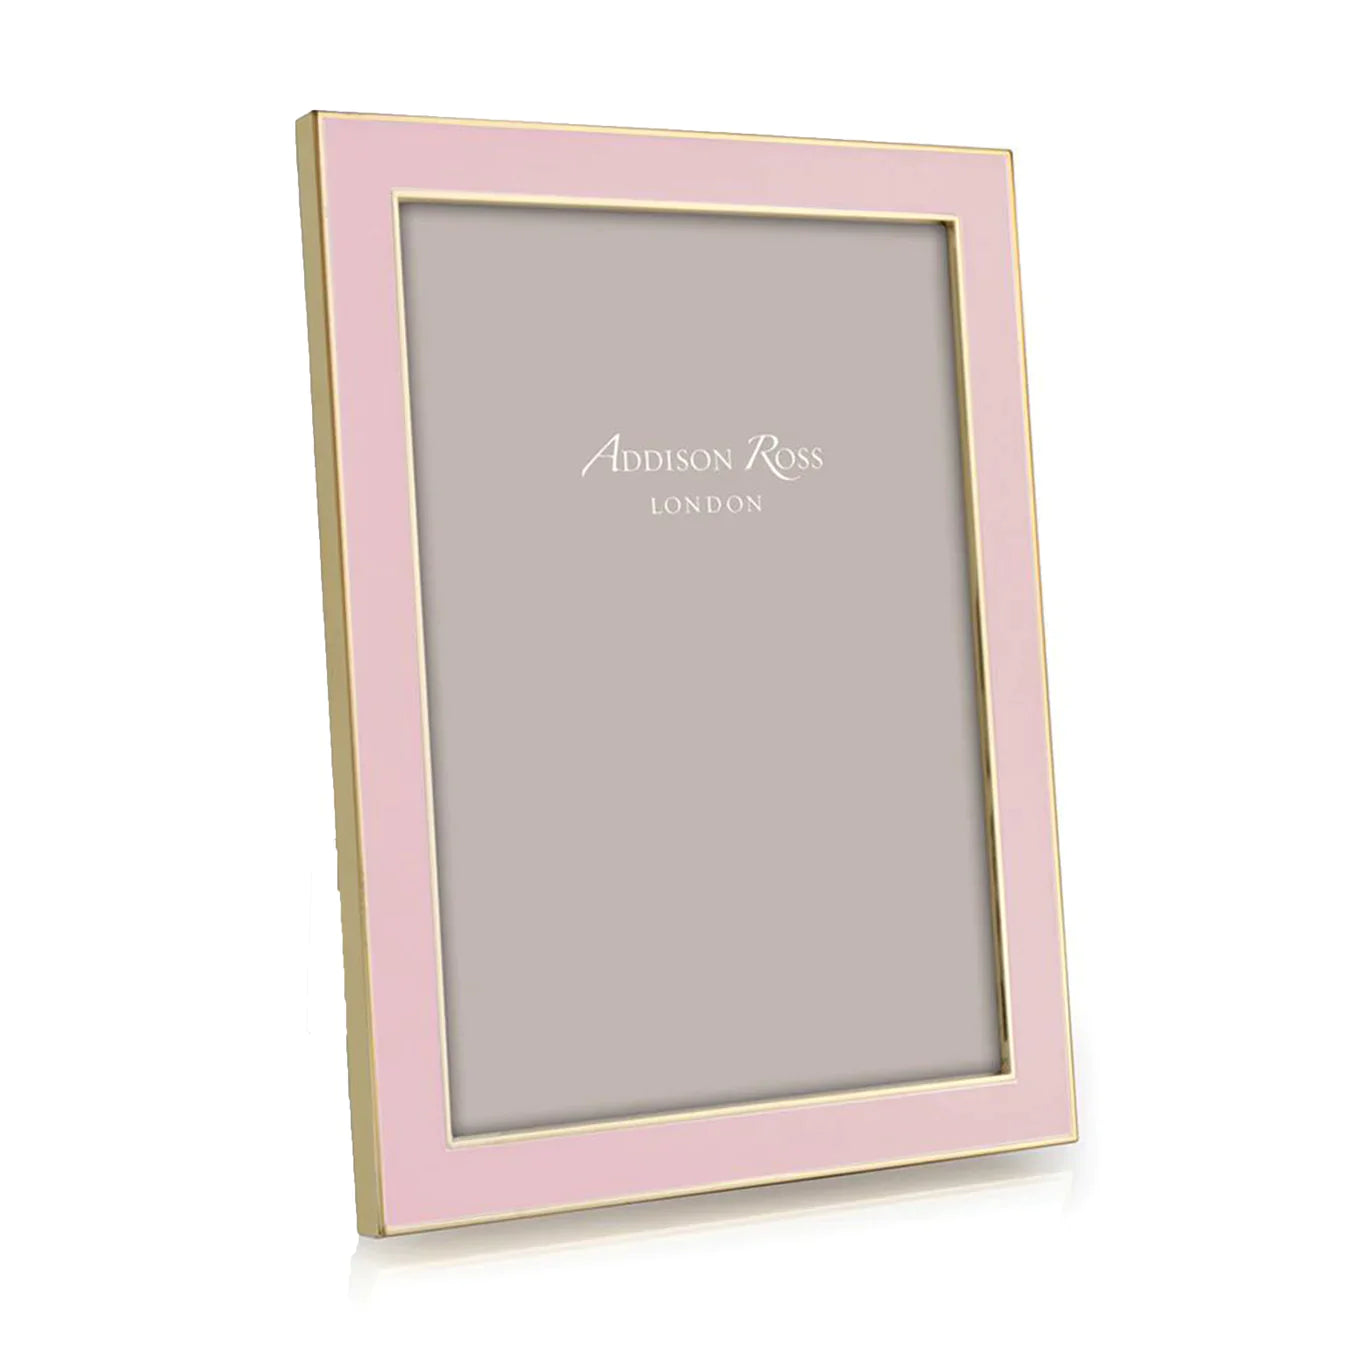 Pale Pink & Gold Enamel Picture Frame - 5x7 - The Preppy Bunny